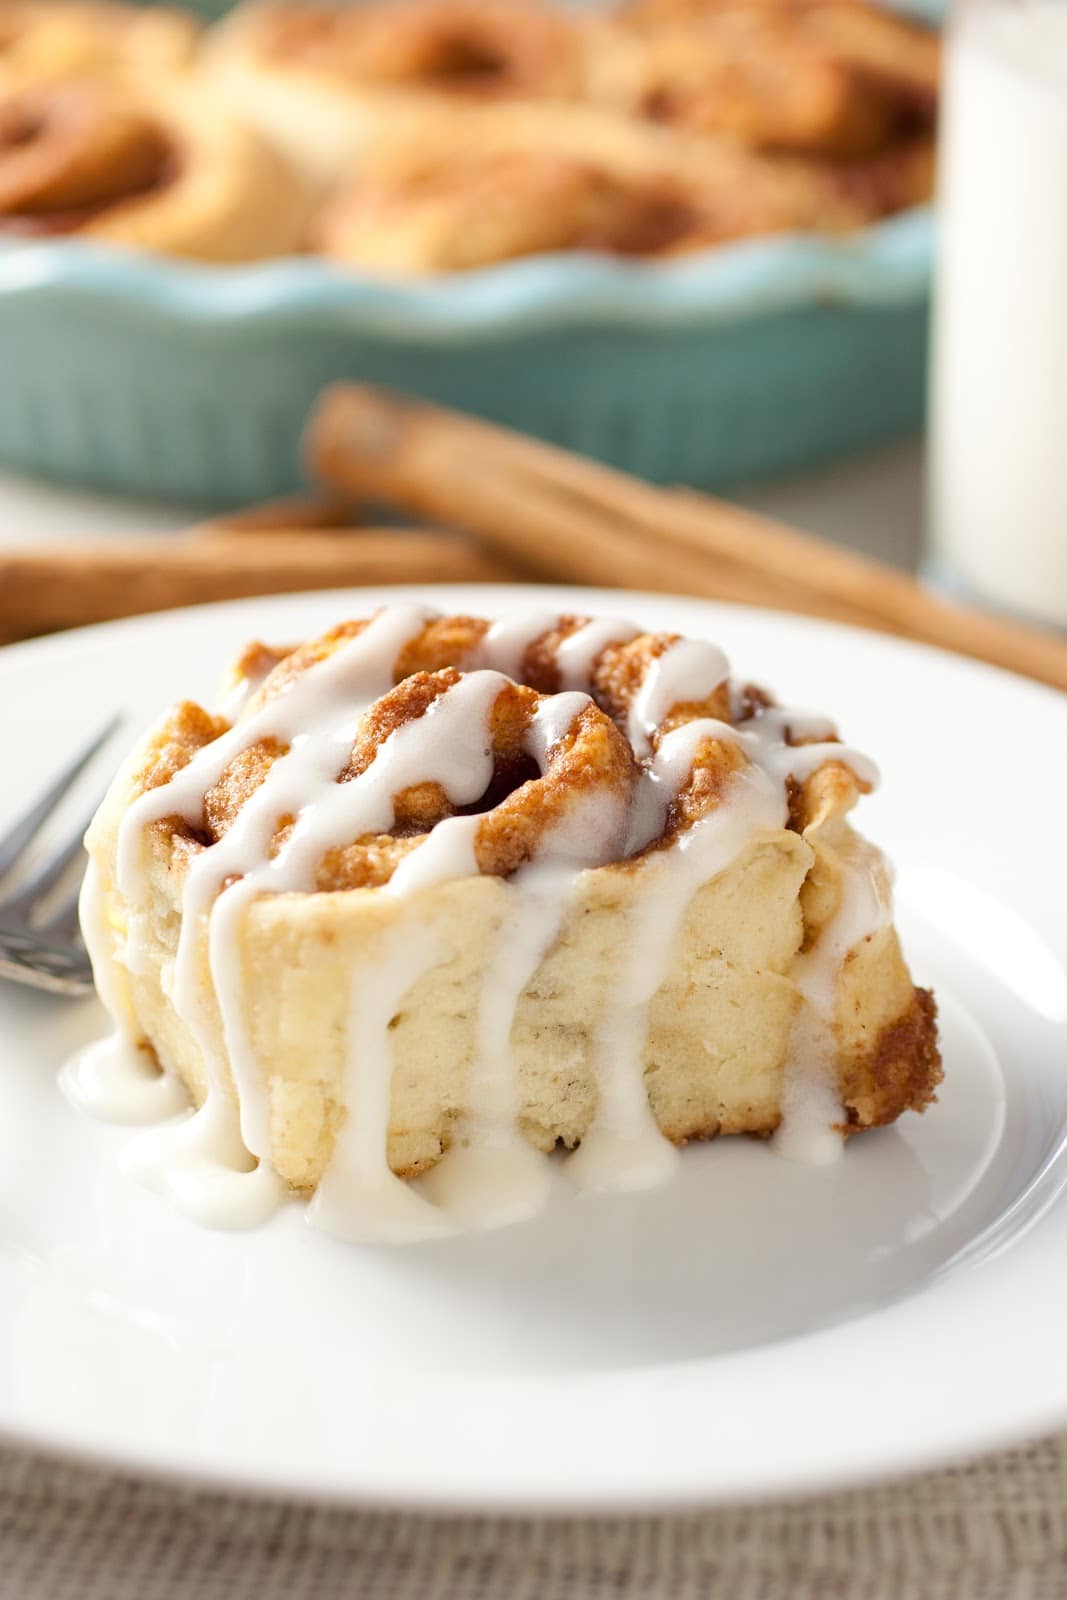 45 Minute Cinnamon Rolls {From Scratch} - Cooking Classy